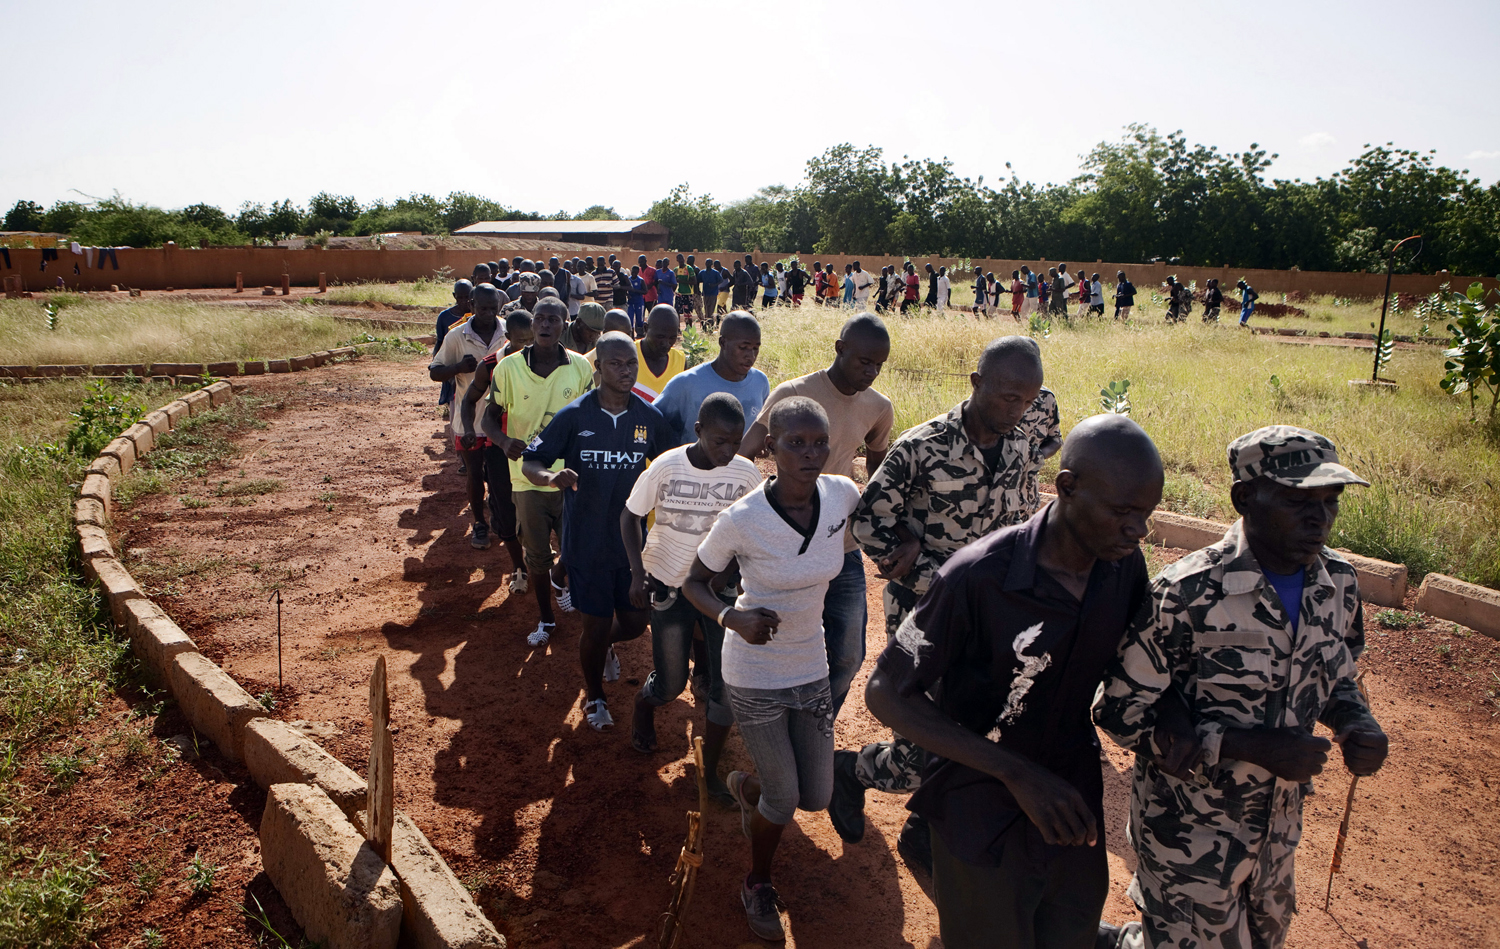 People run during a training session at the FLN movement (North Liberation Forces) camp in Sevare September 24, 2012. The FLN is a part of a militia which trains youths from all over the country and operates in government-controlled areas run by curr